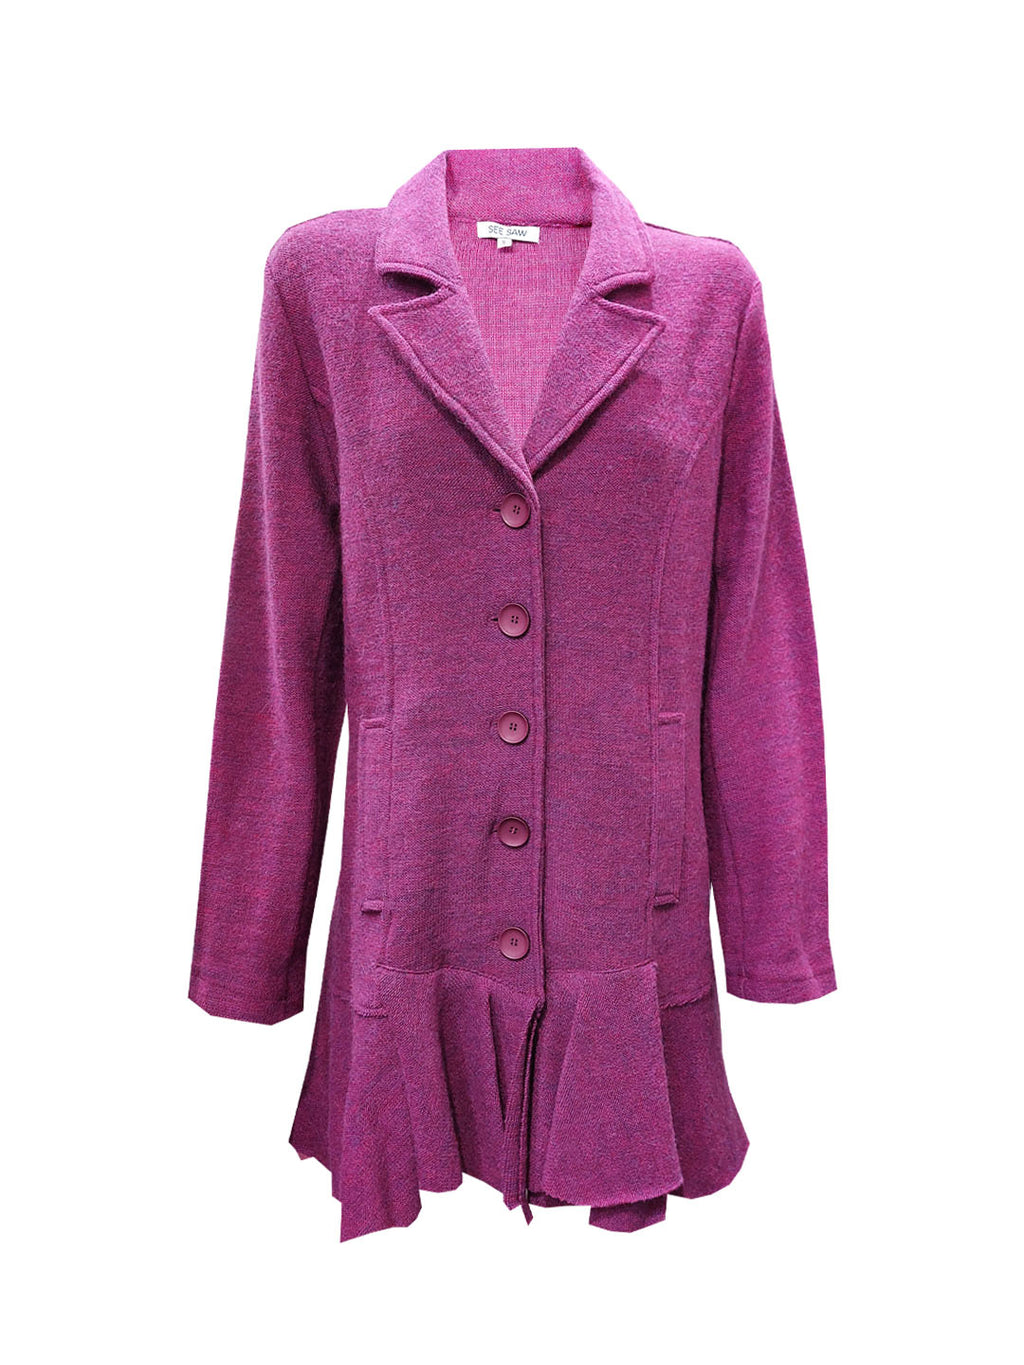 SEE SAW FRILL HEM BUTTON FRONT COAT